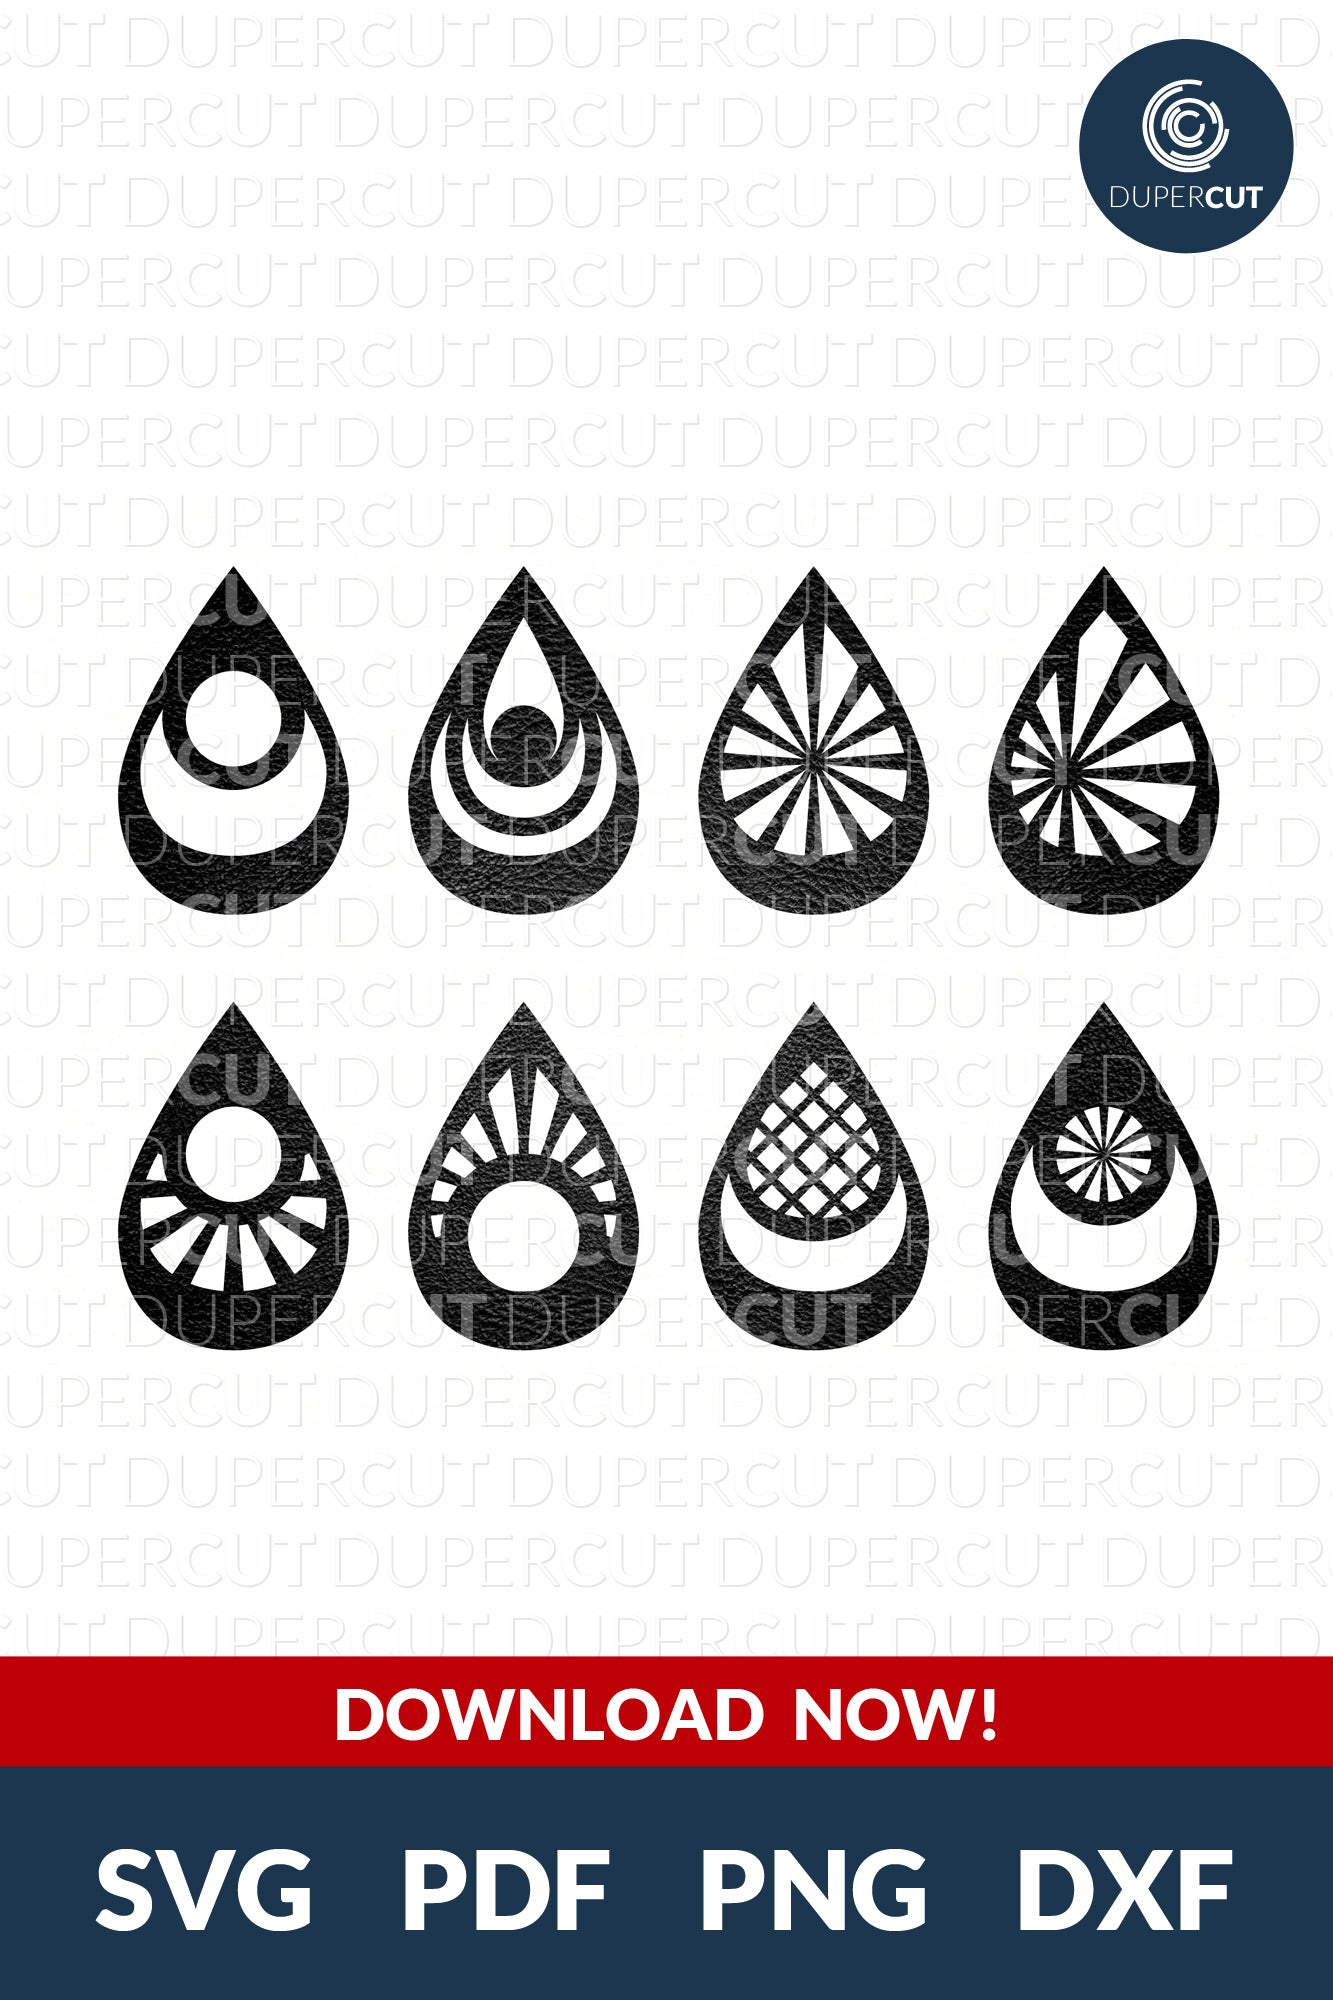 DIY Geometric Leather woodworking Earrings SVG PDF DXF vector files. Jewellery making template for laser and cutting machines - Glowforge, Cricut, Silhouette Cameo.